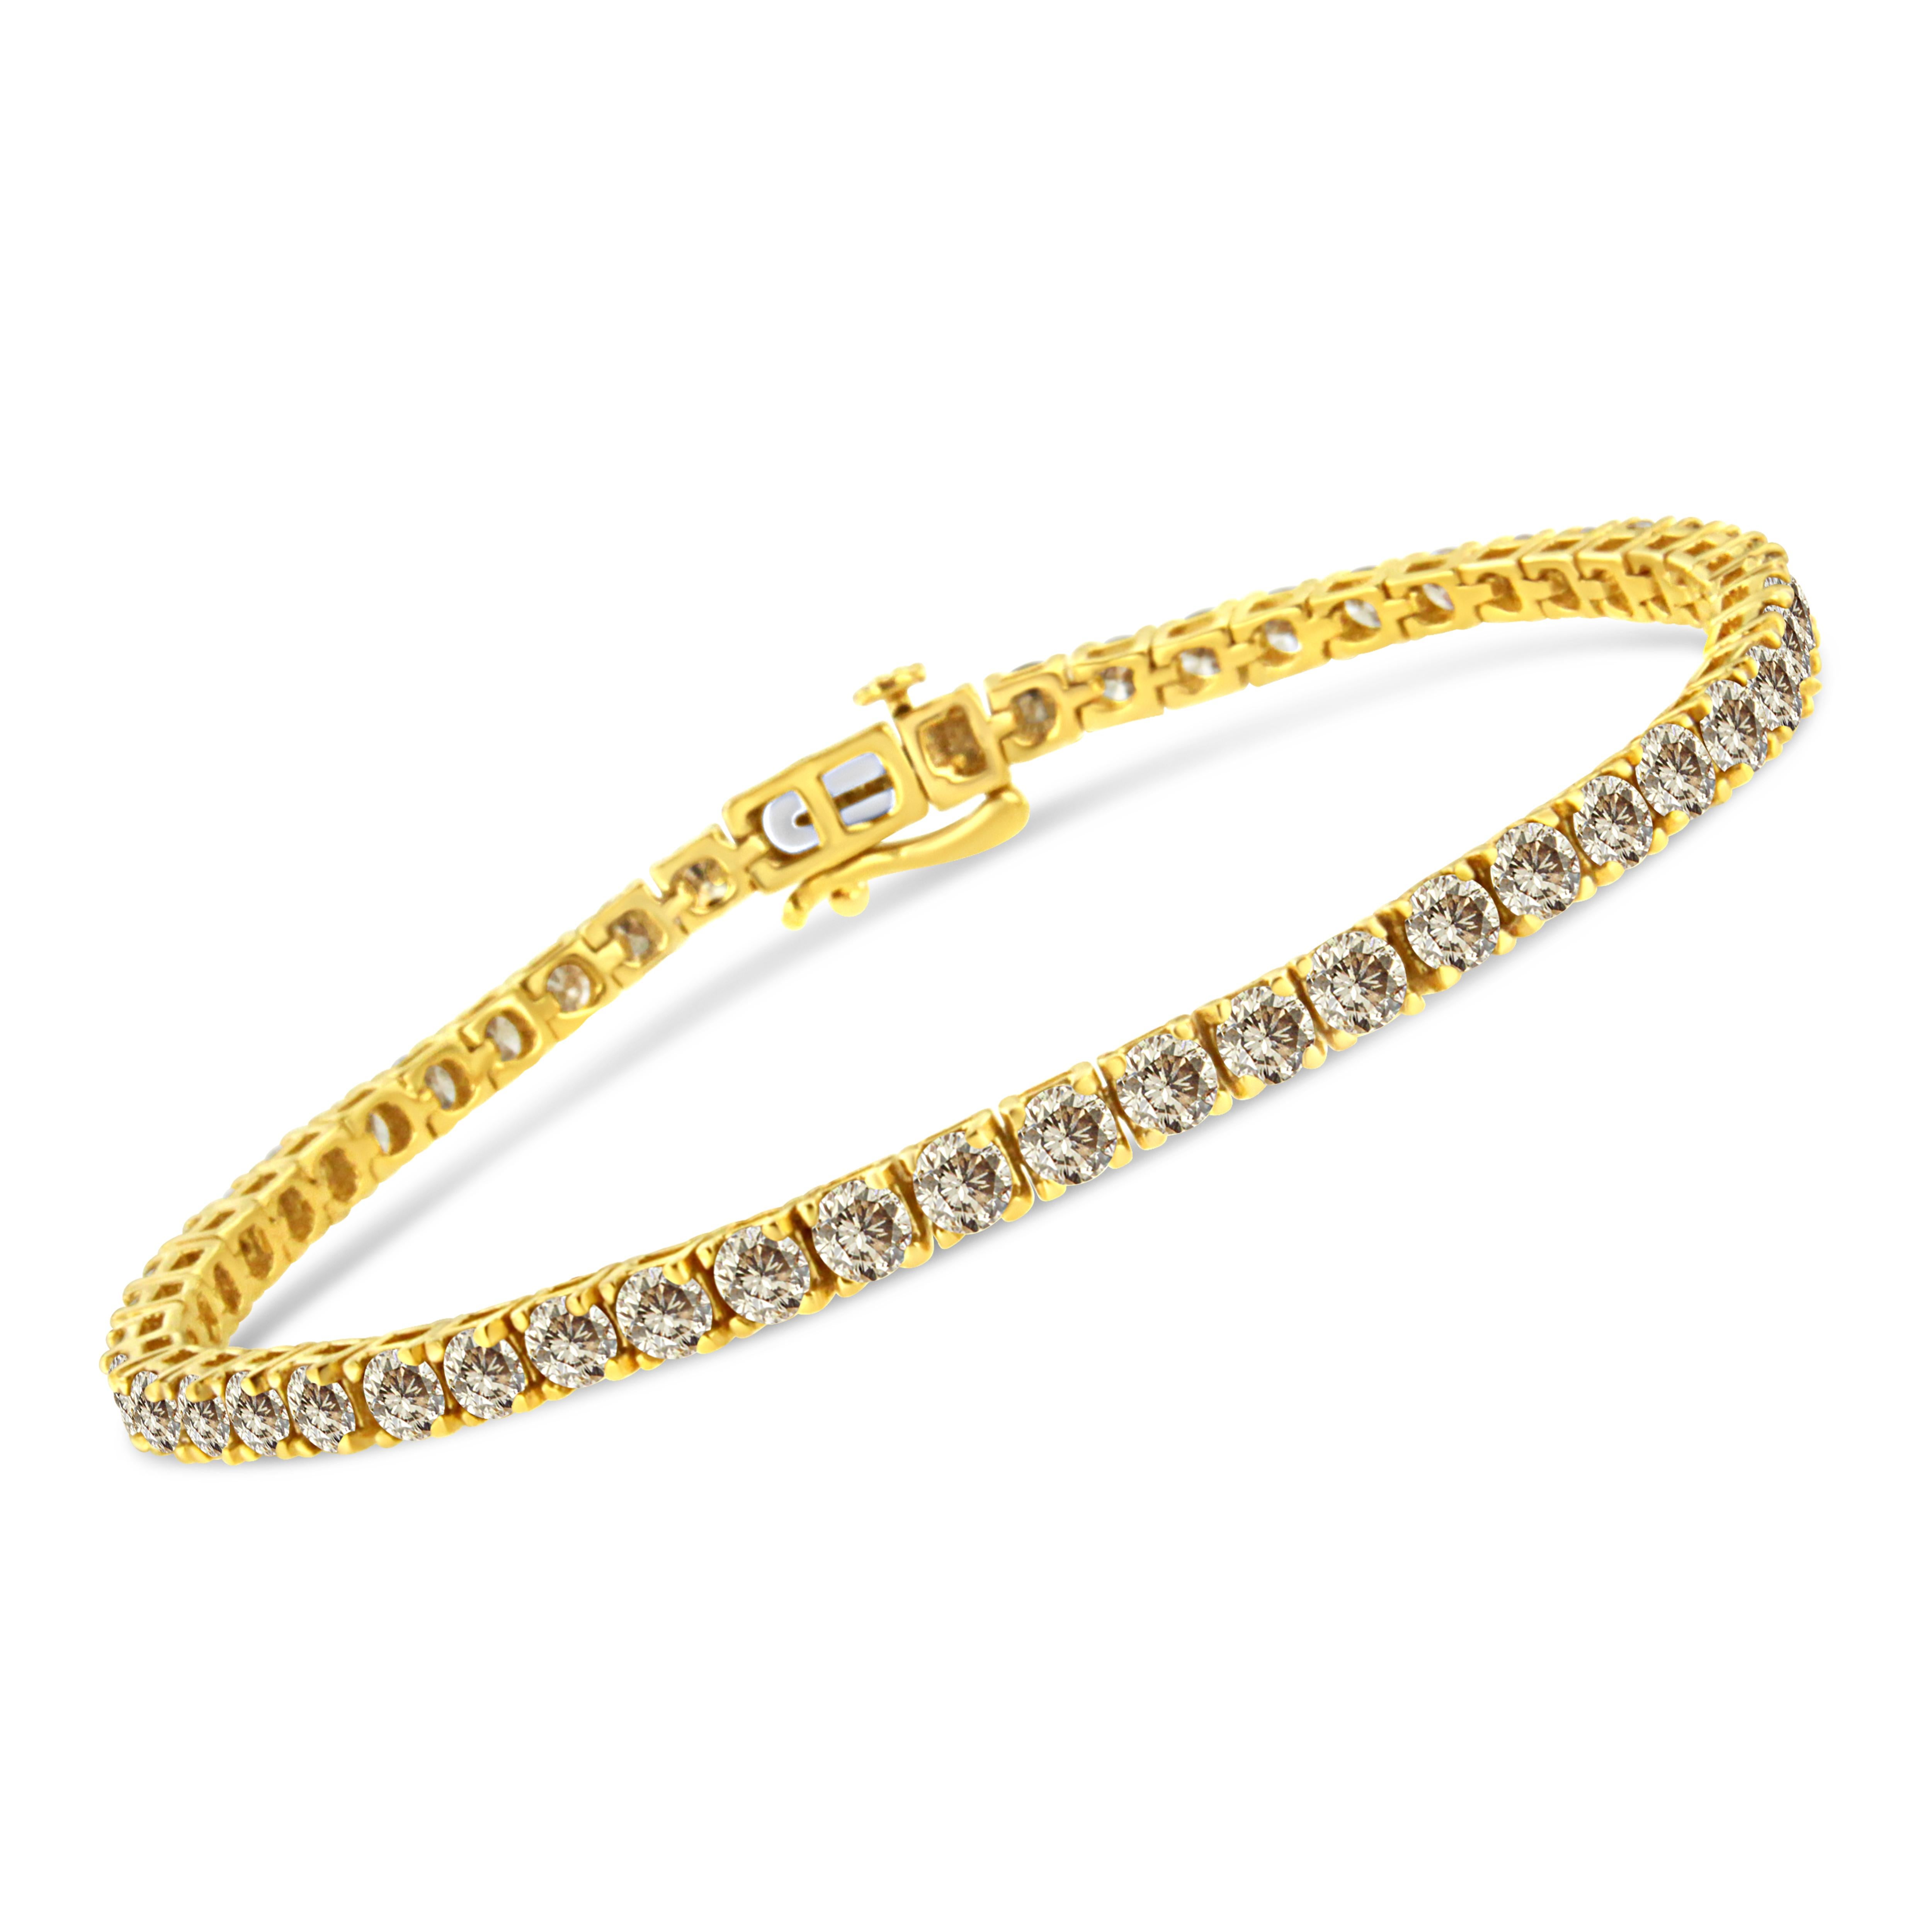 Elevate her attire with the luxe look of this magnificent diamond tennis bracelet. Crafted in the finest 14k yellow gold plated .925 sterling silver, this spectacular design features 52 dazzling natural diamonds, each with a color grade K-L color